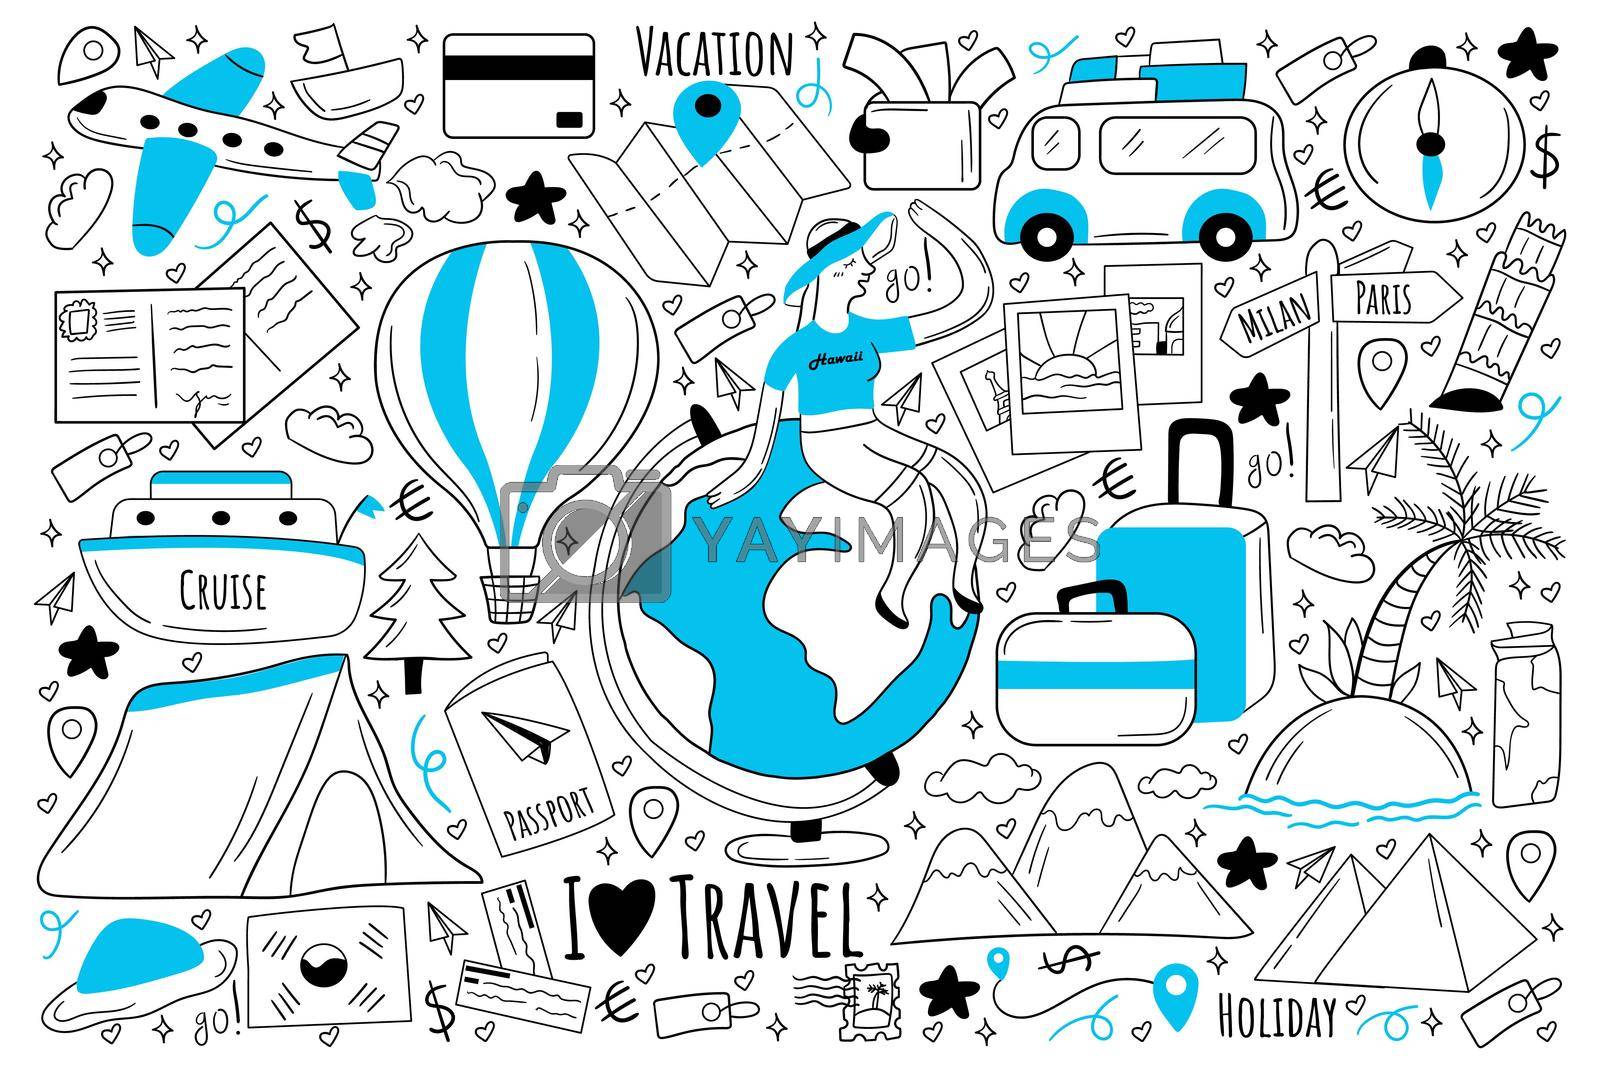 Travel doodle set. Collection of hand drawn sketches templates of people tourists travelling around world on holiday or vacation at cruise or plane. Active lifestyle tourism recreation illustration.